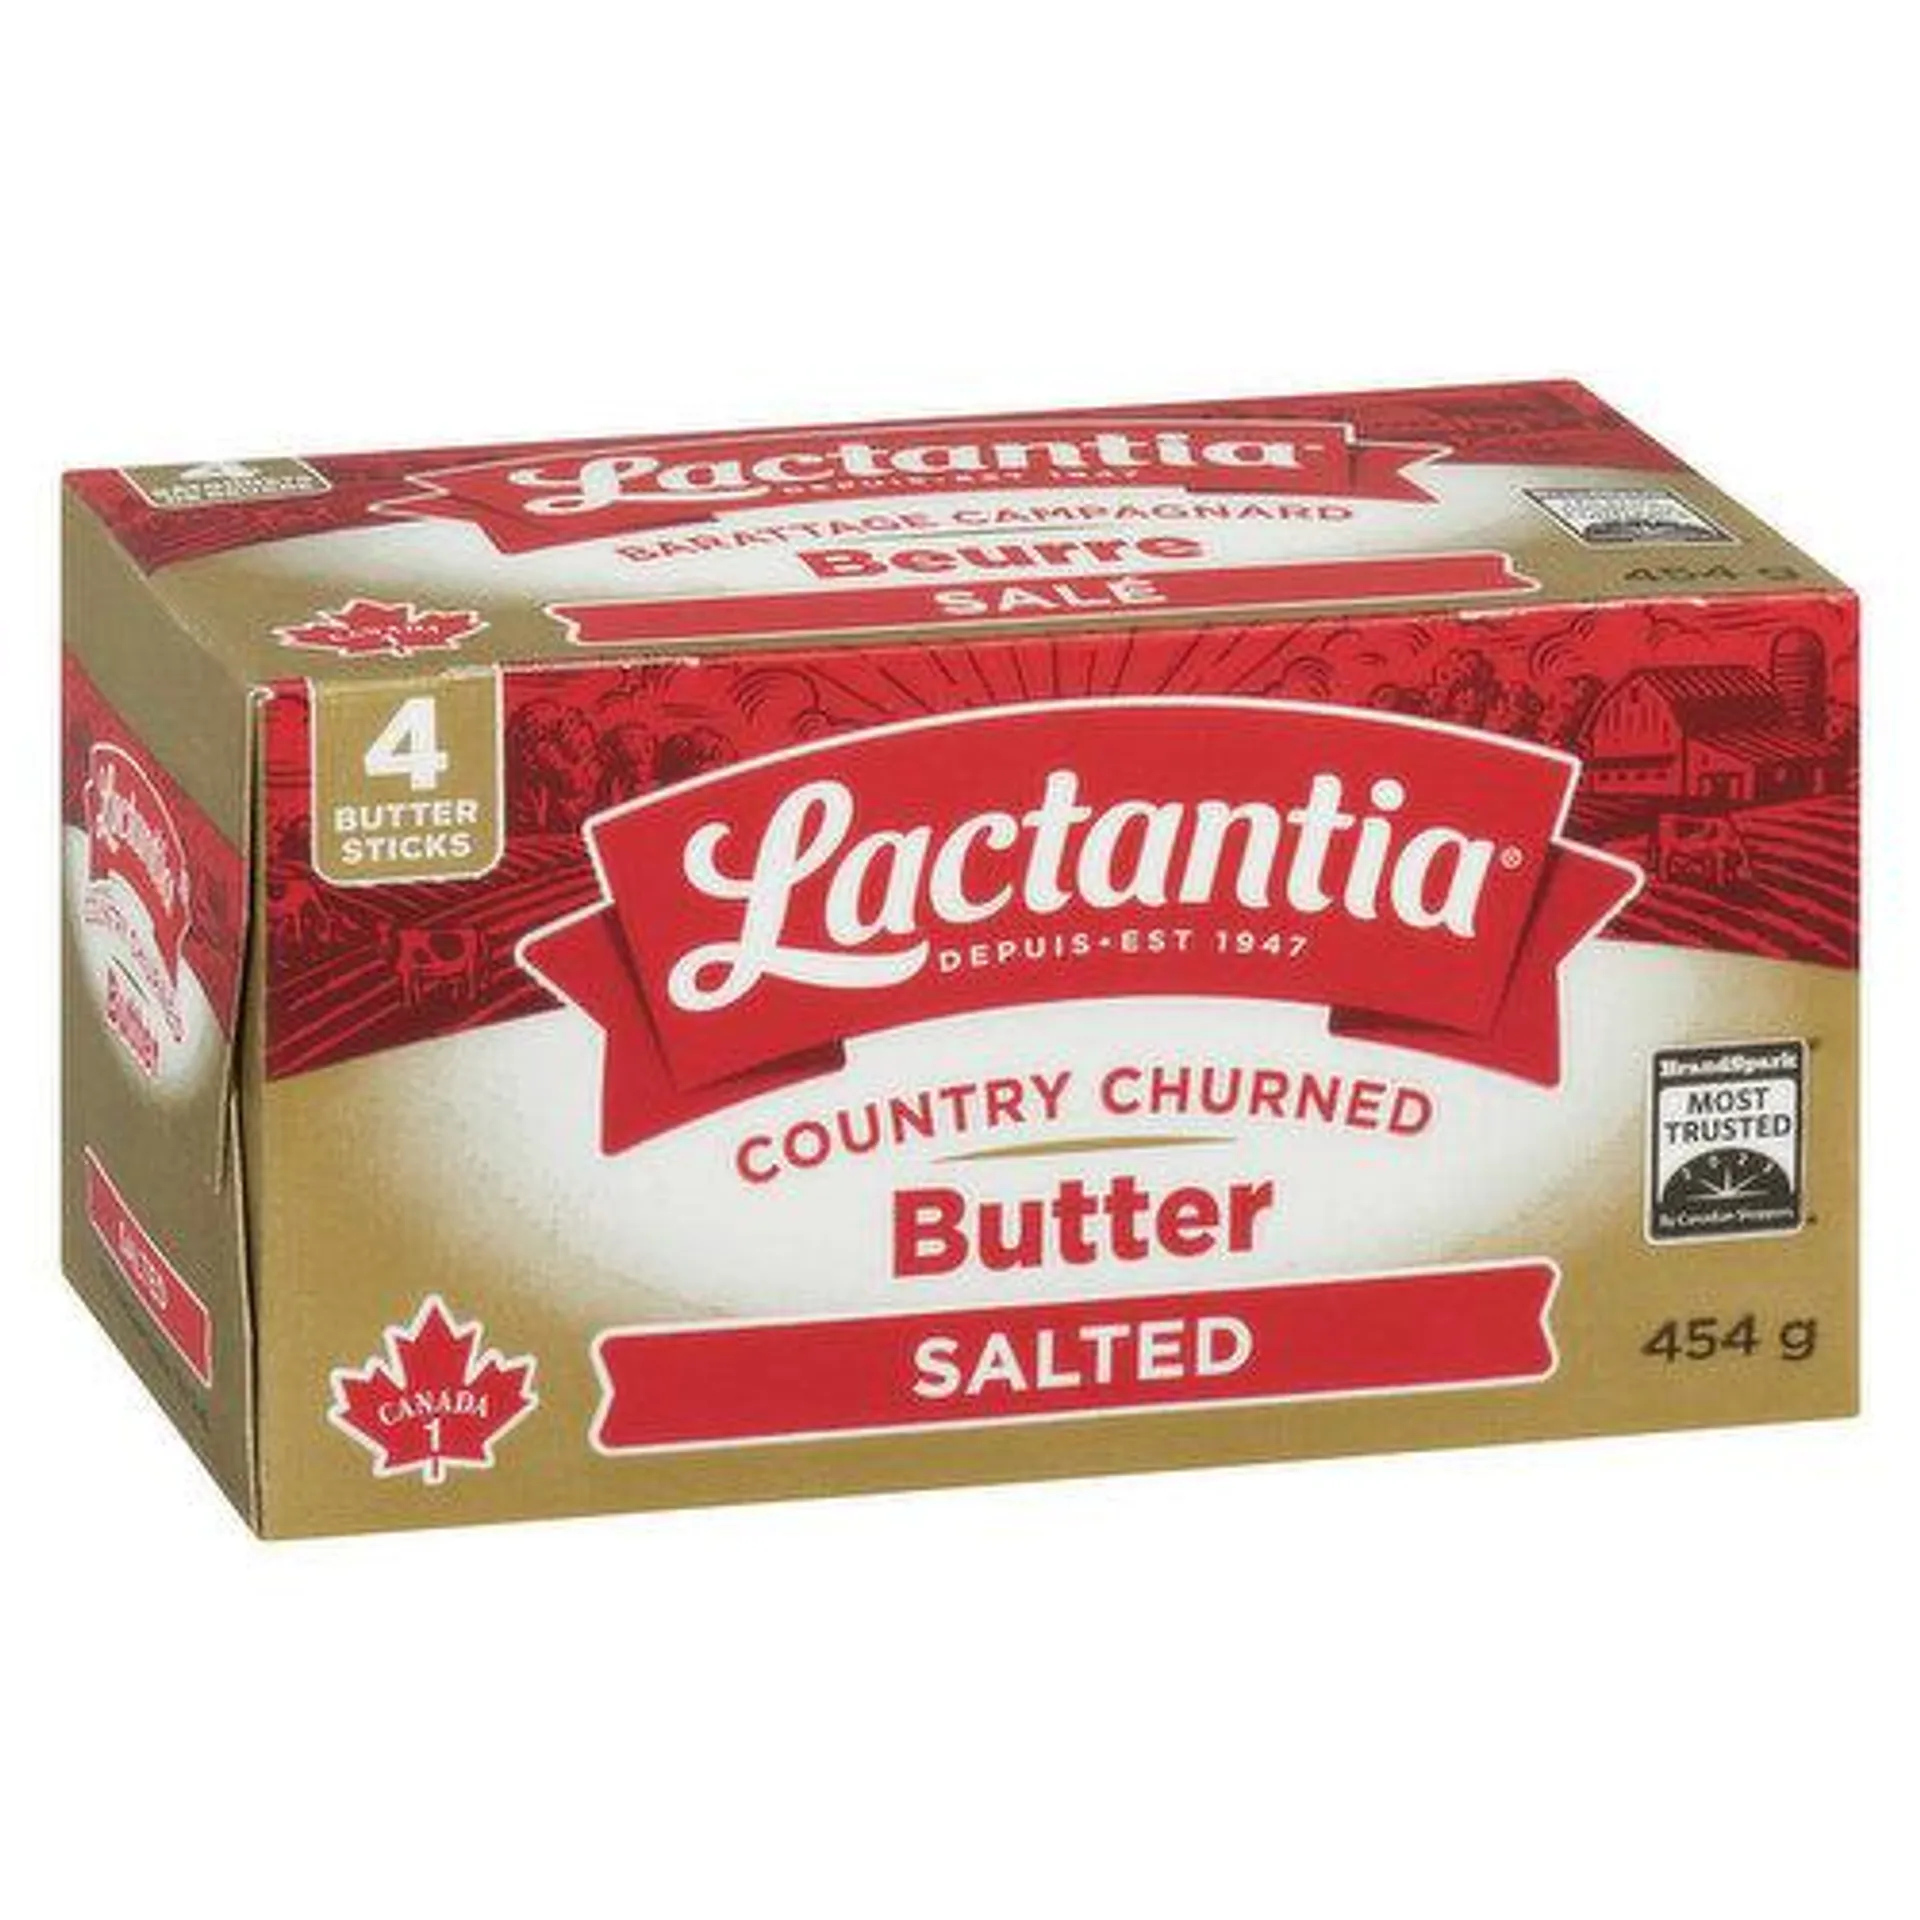 Lactantia - Butter Sticks Salted Country Churned, 454 Gram